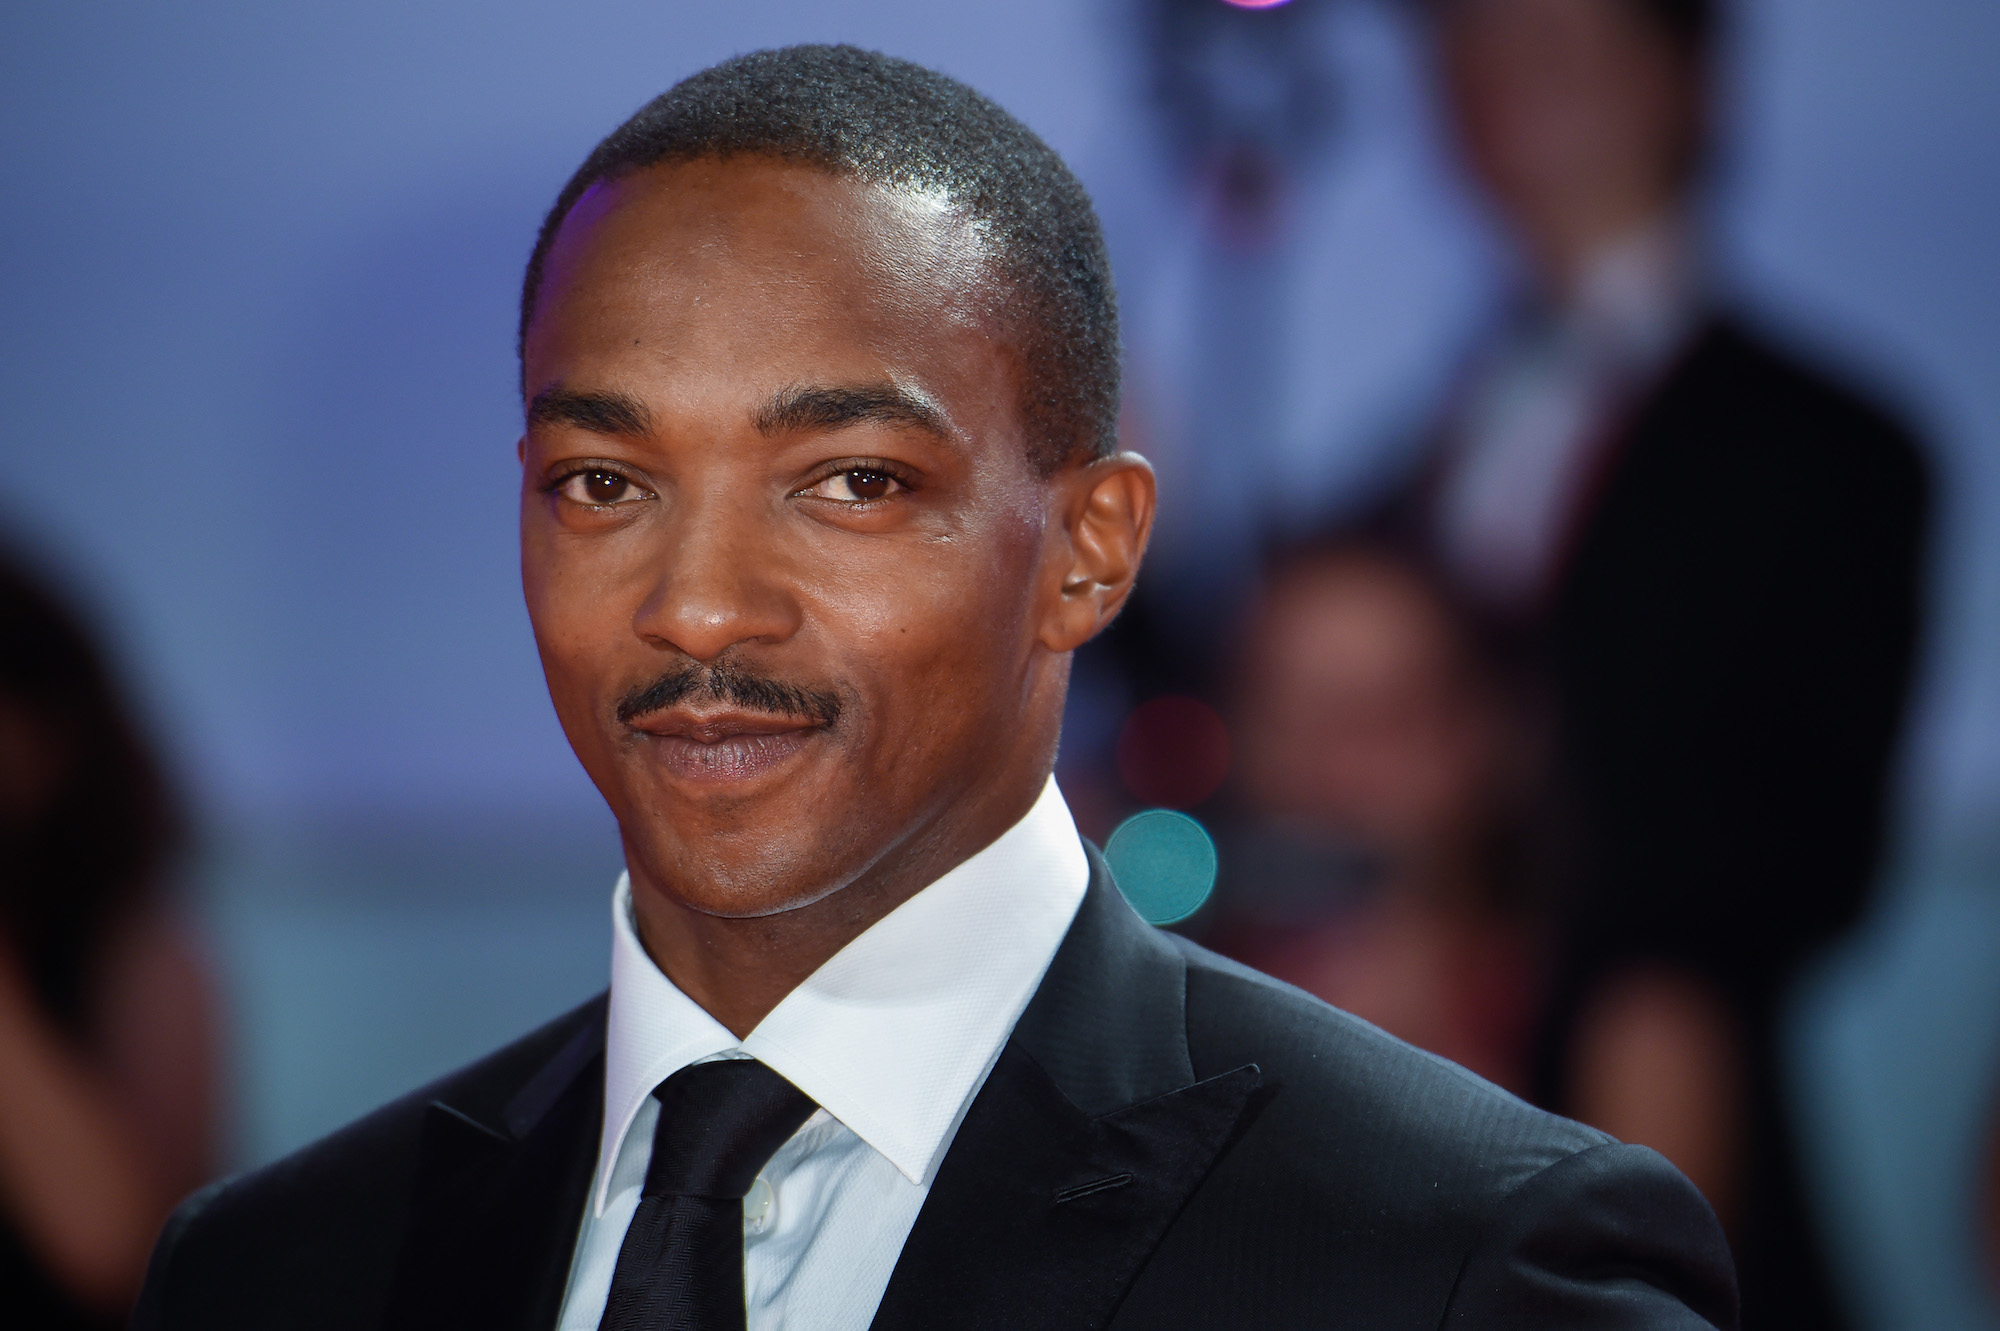 MCU Actor Anthony Mackie Talks Teaching His Kids About Activism